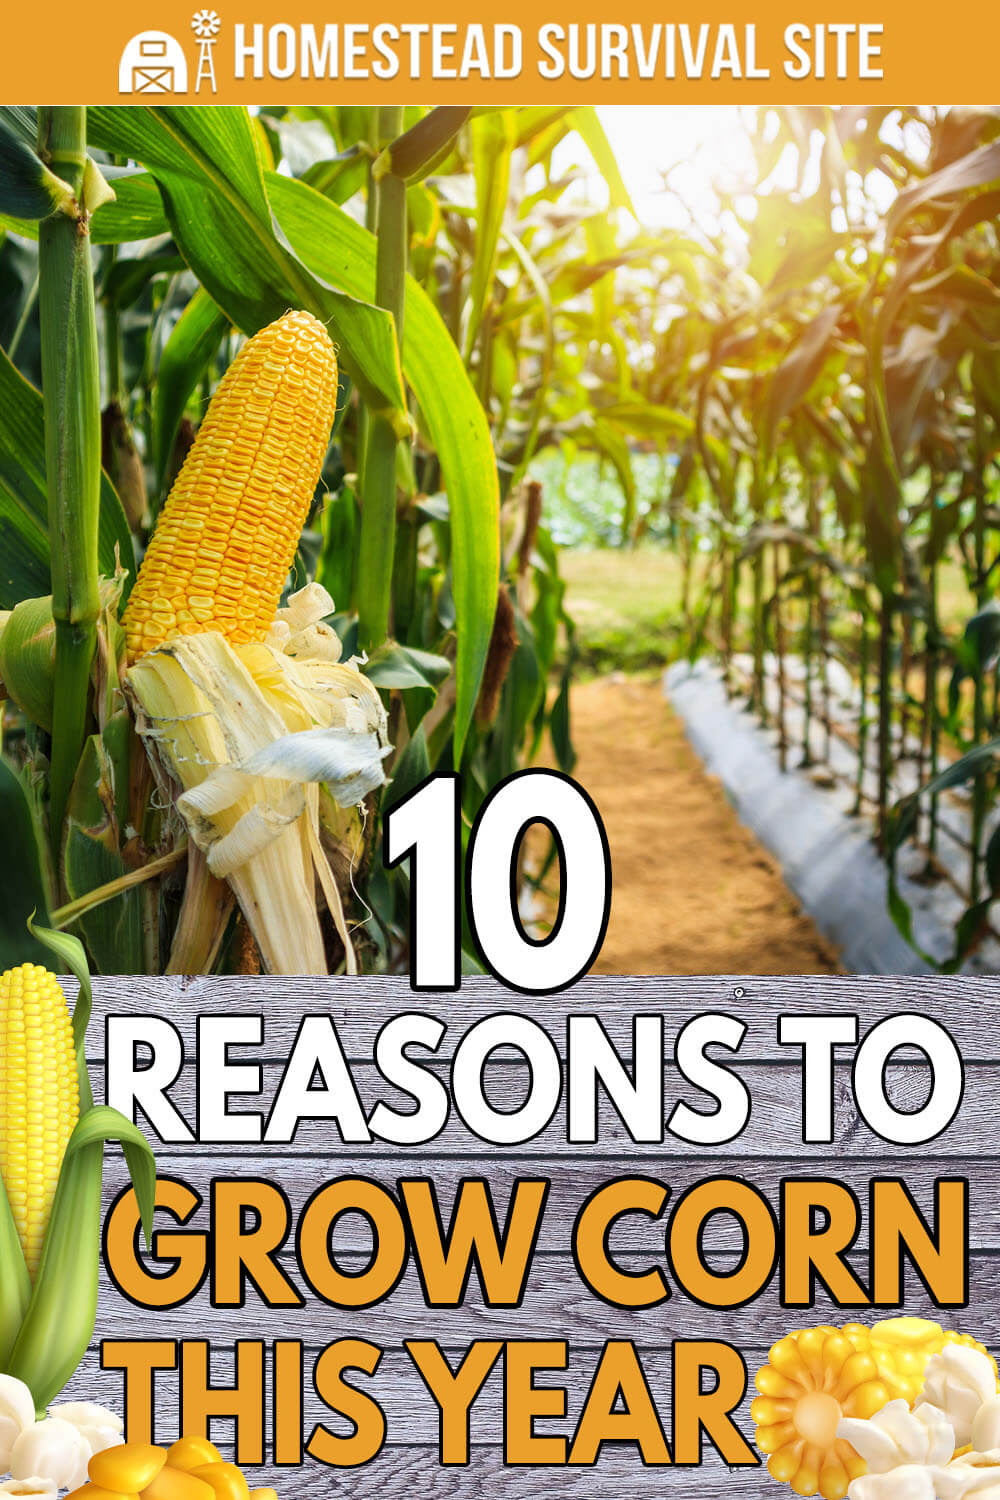 10 Reasons to Grow Corn This Year